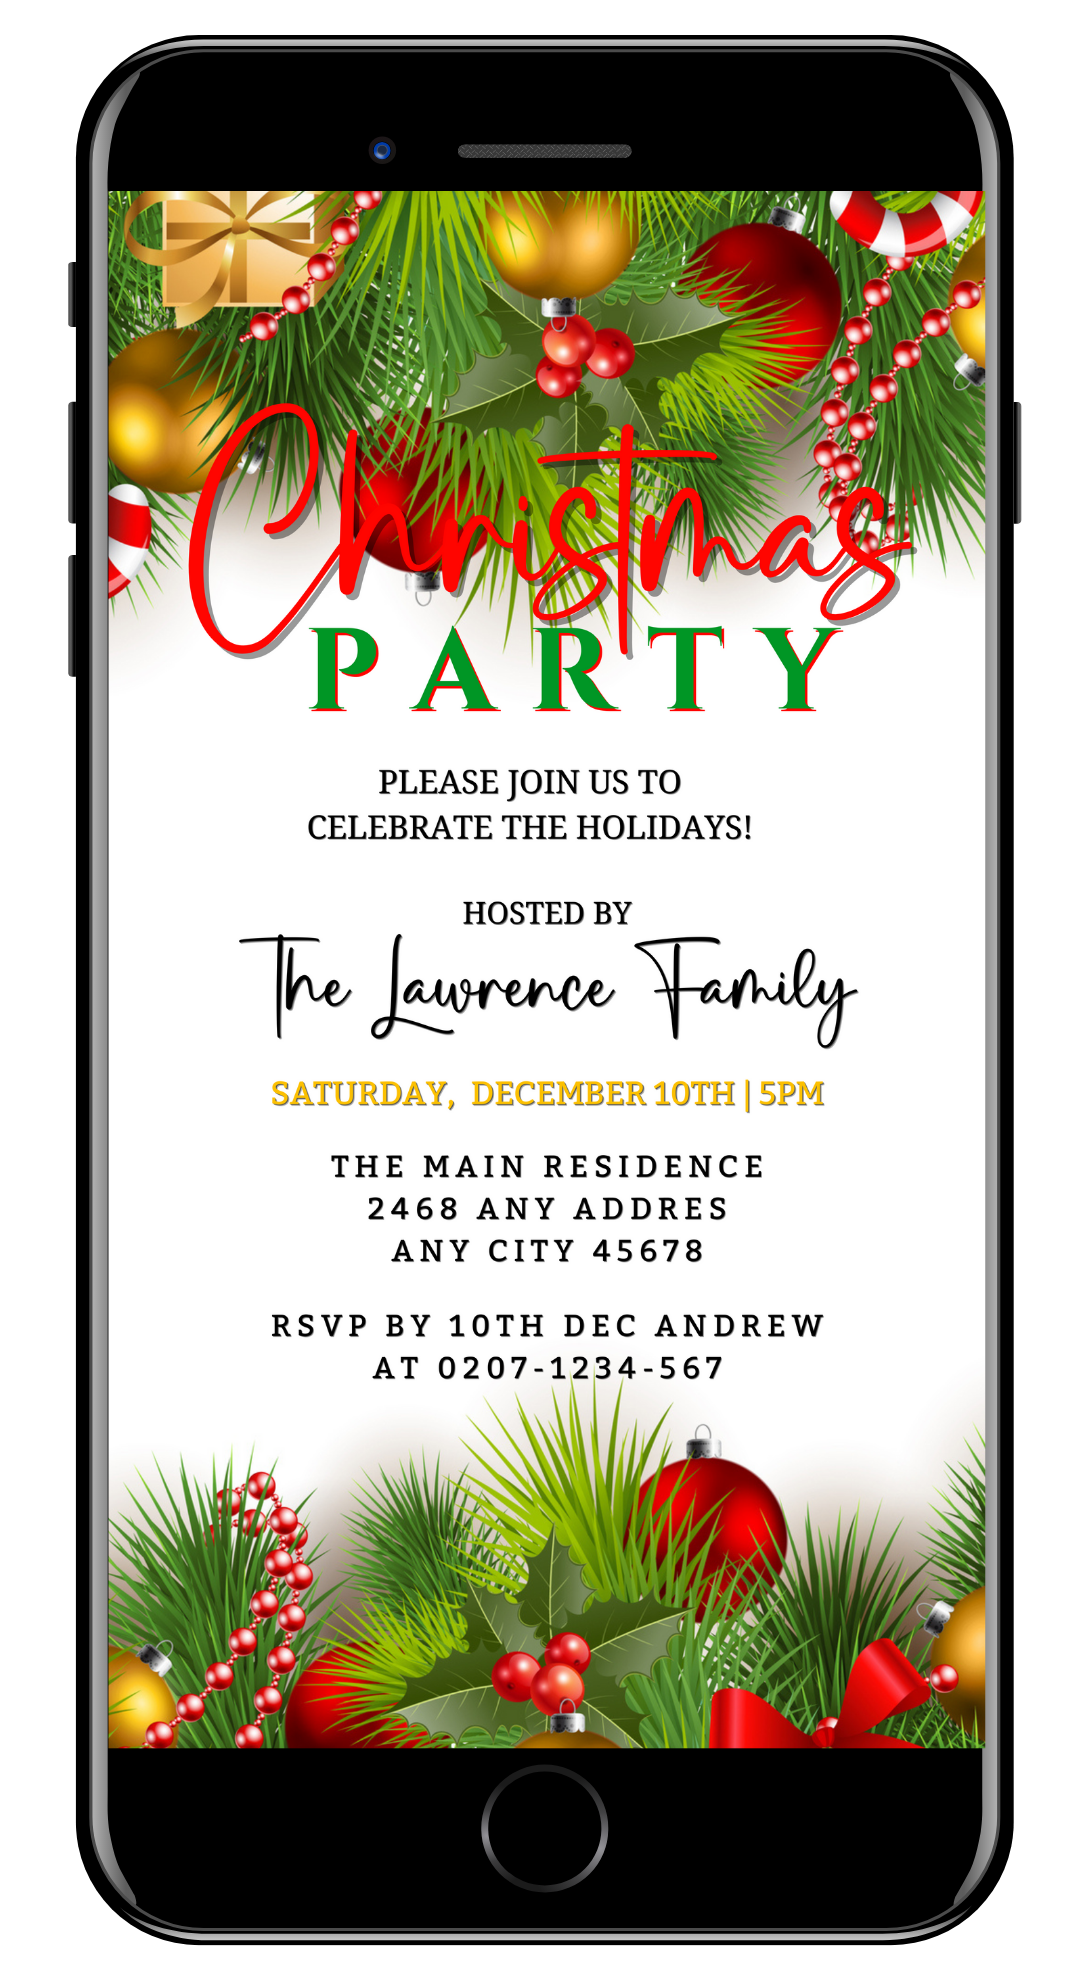 Editable Digital White Green Ornaments Christmas Party Invitation displayed on a smartphone screen, featuring customizable text and festive decorations. Ideal for electronic sharing via messaging apps.